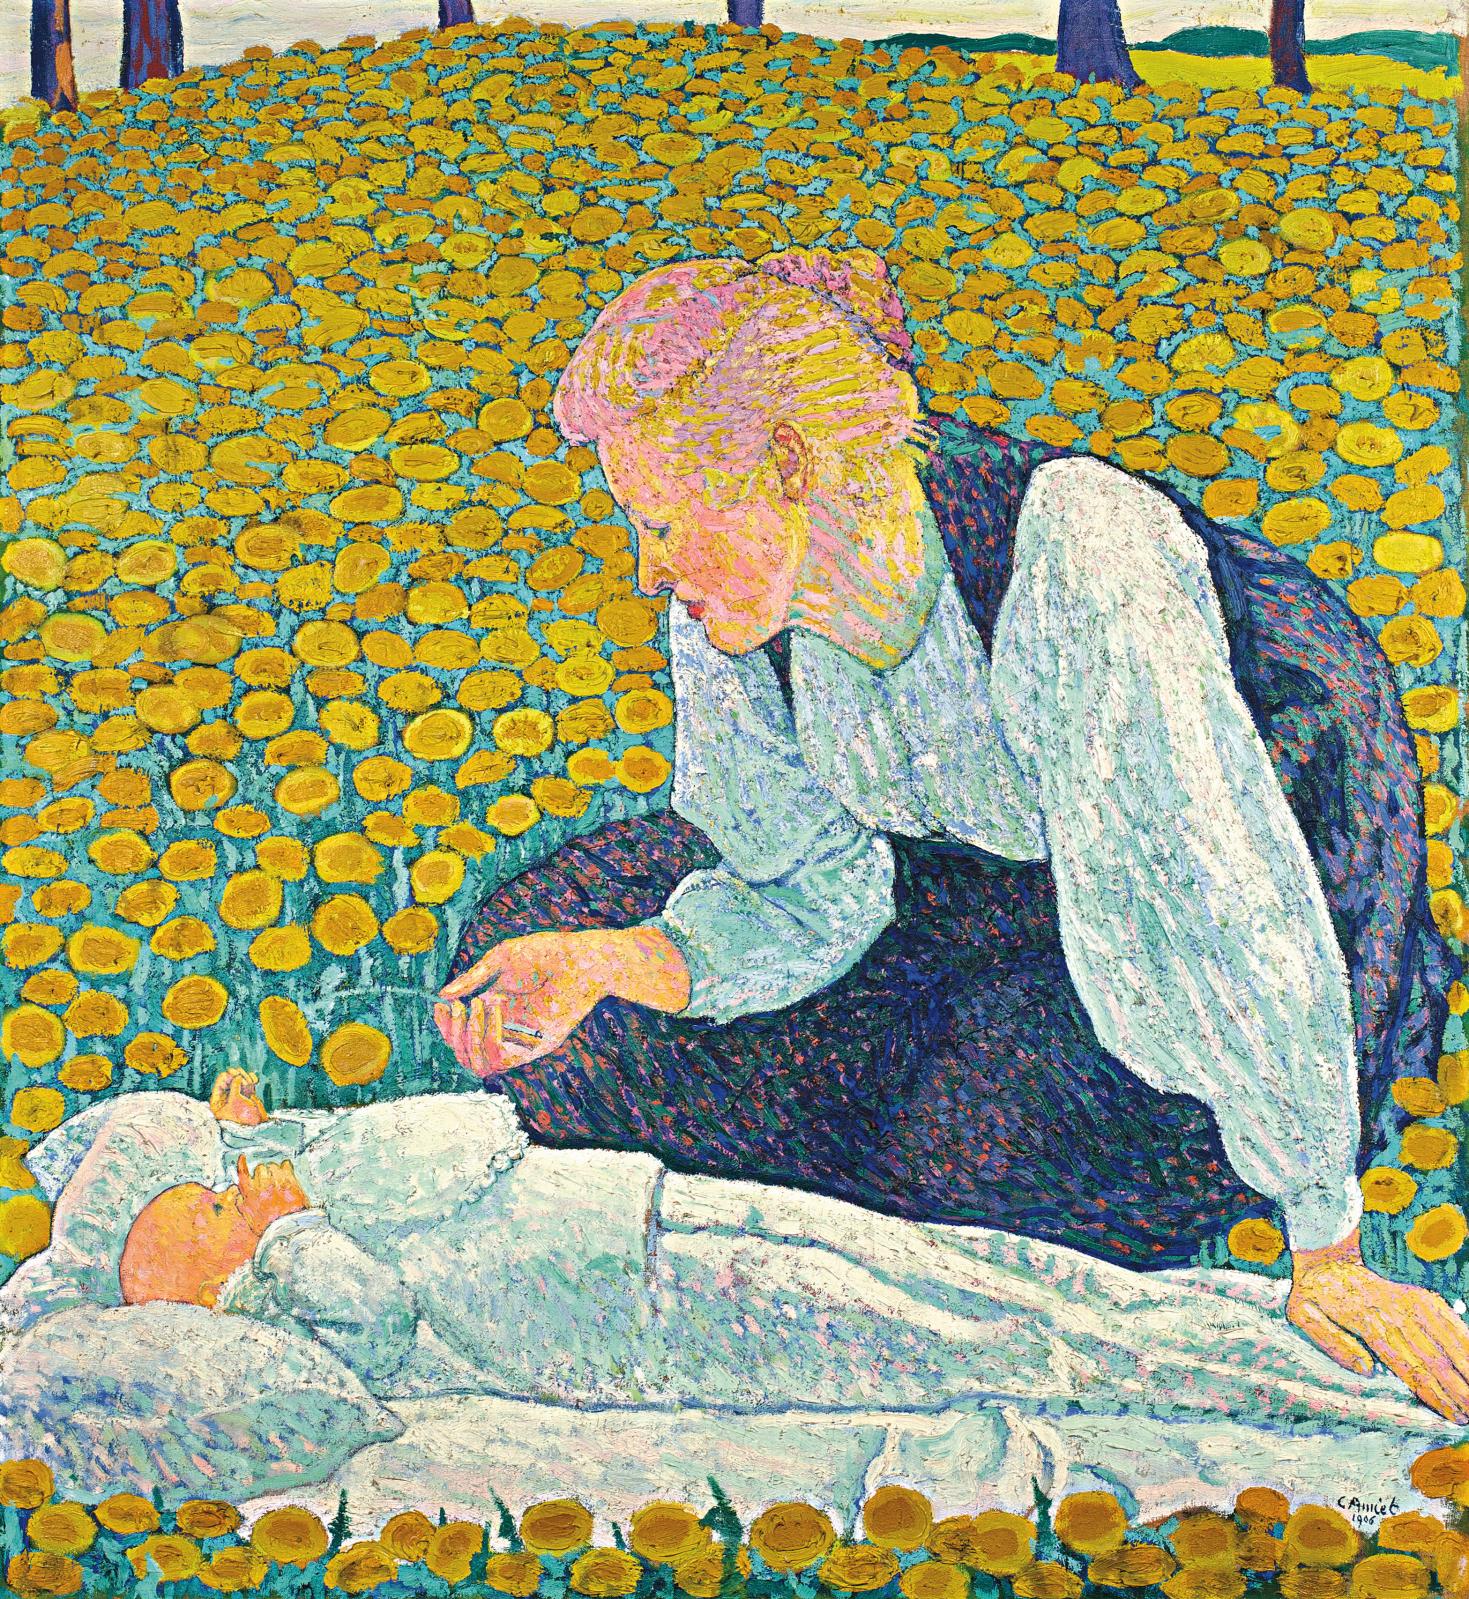 Cuno Amiet: The Consecration 